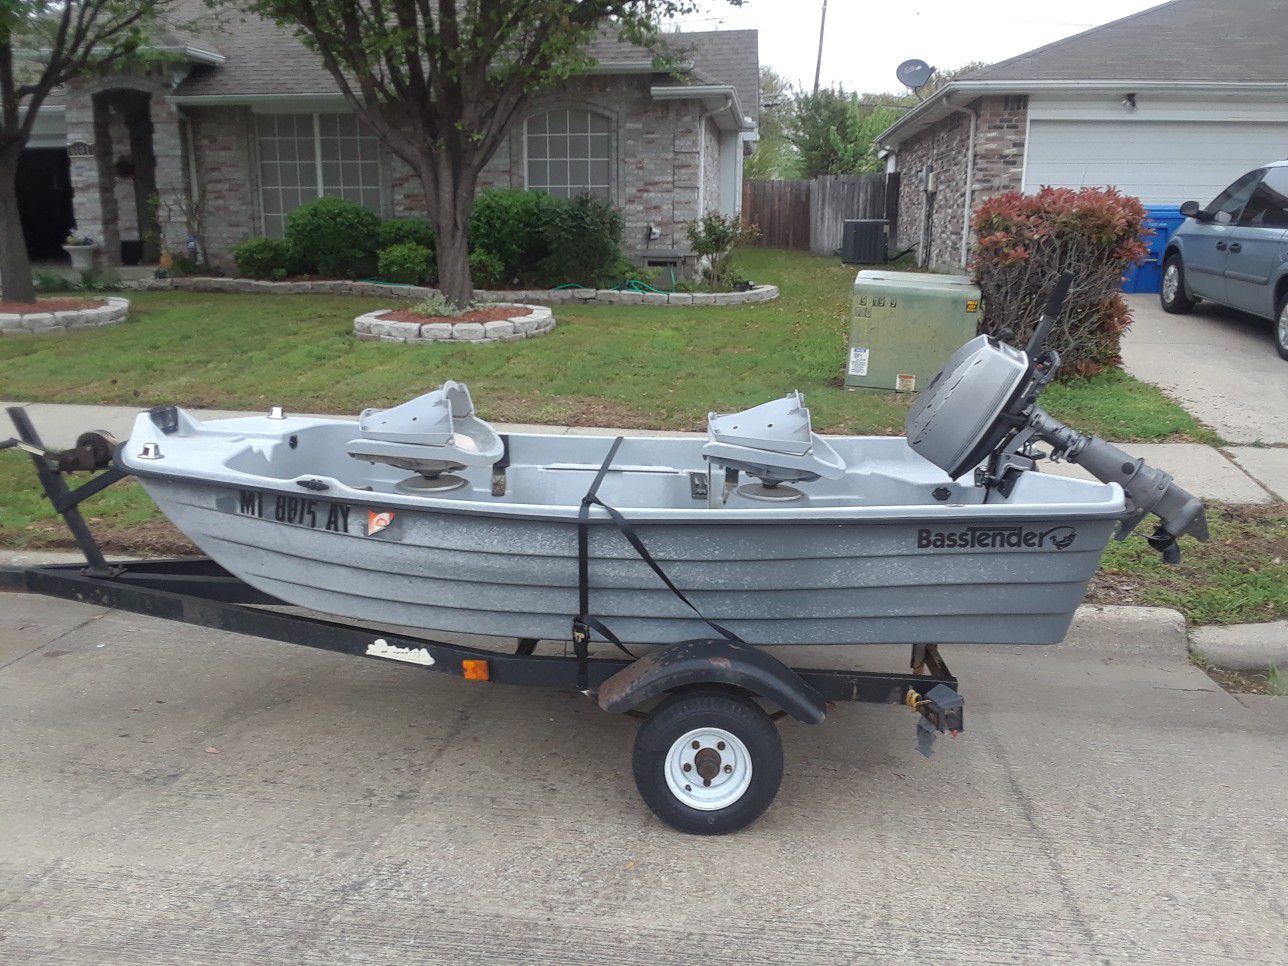 12ft bass intruder 2 man boat with trailer for Sale in Rowlett, TX - OfferUp